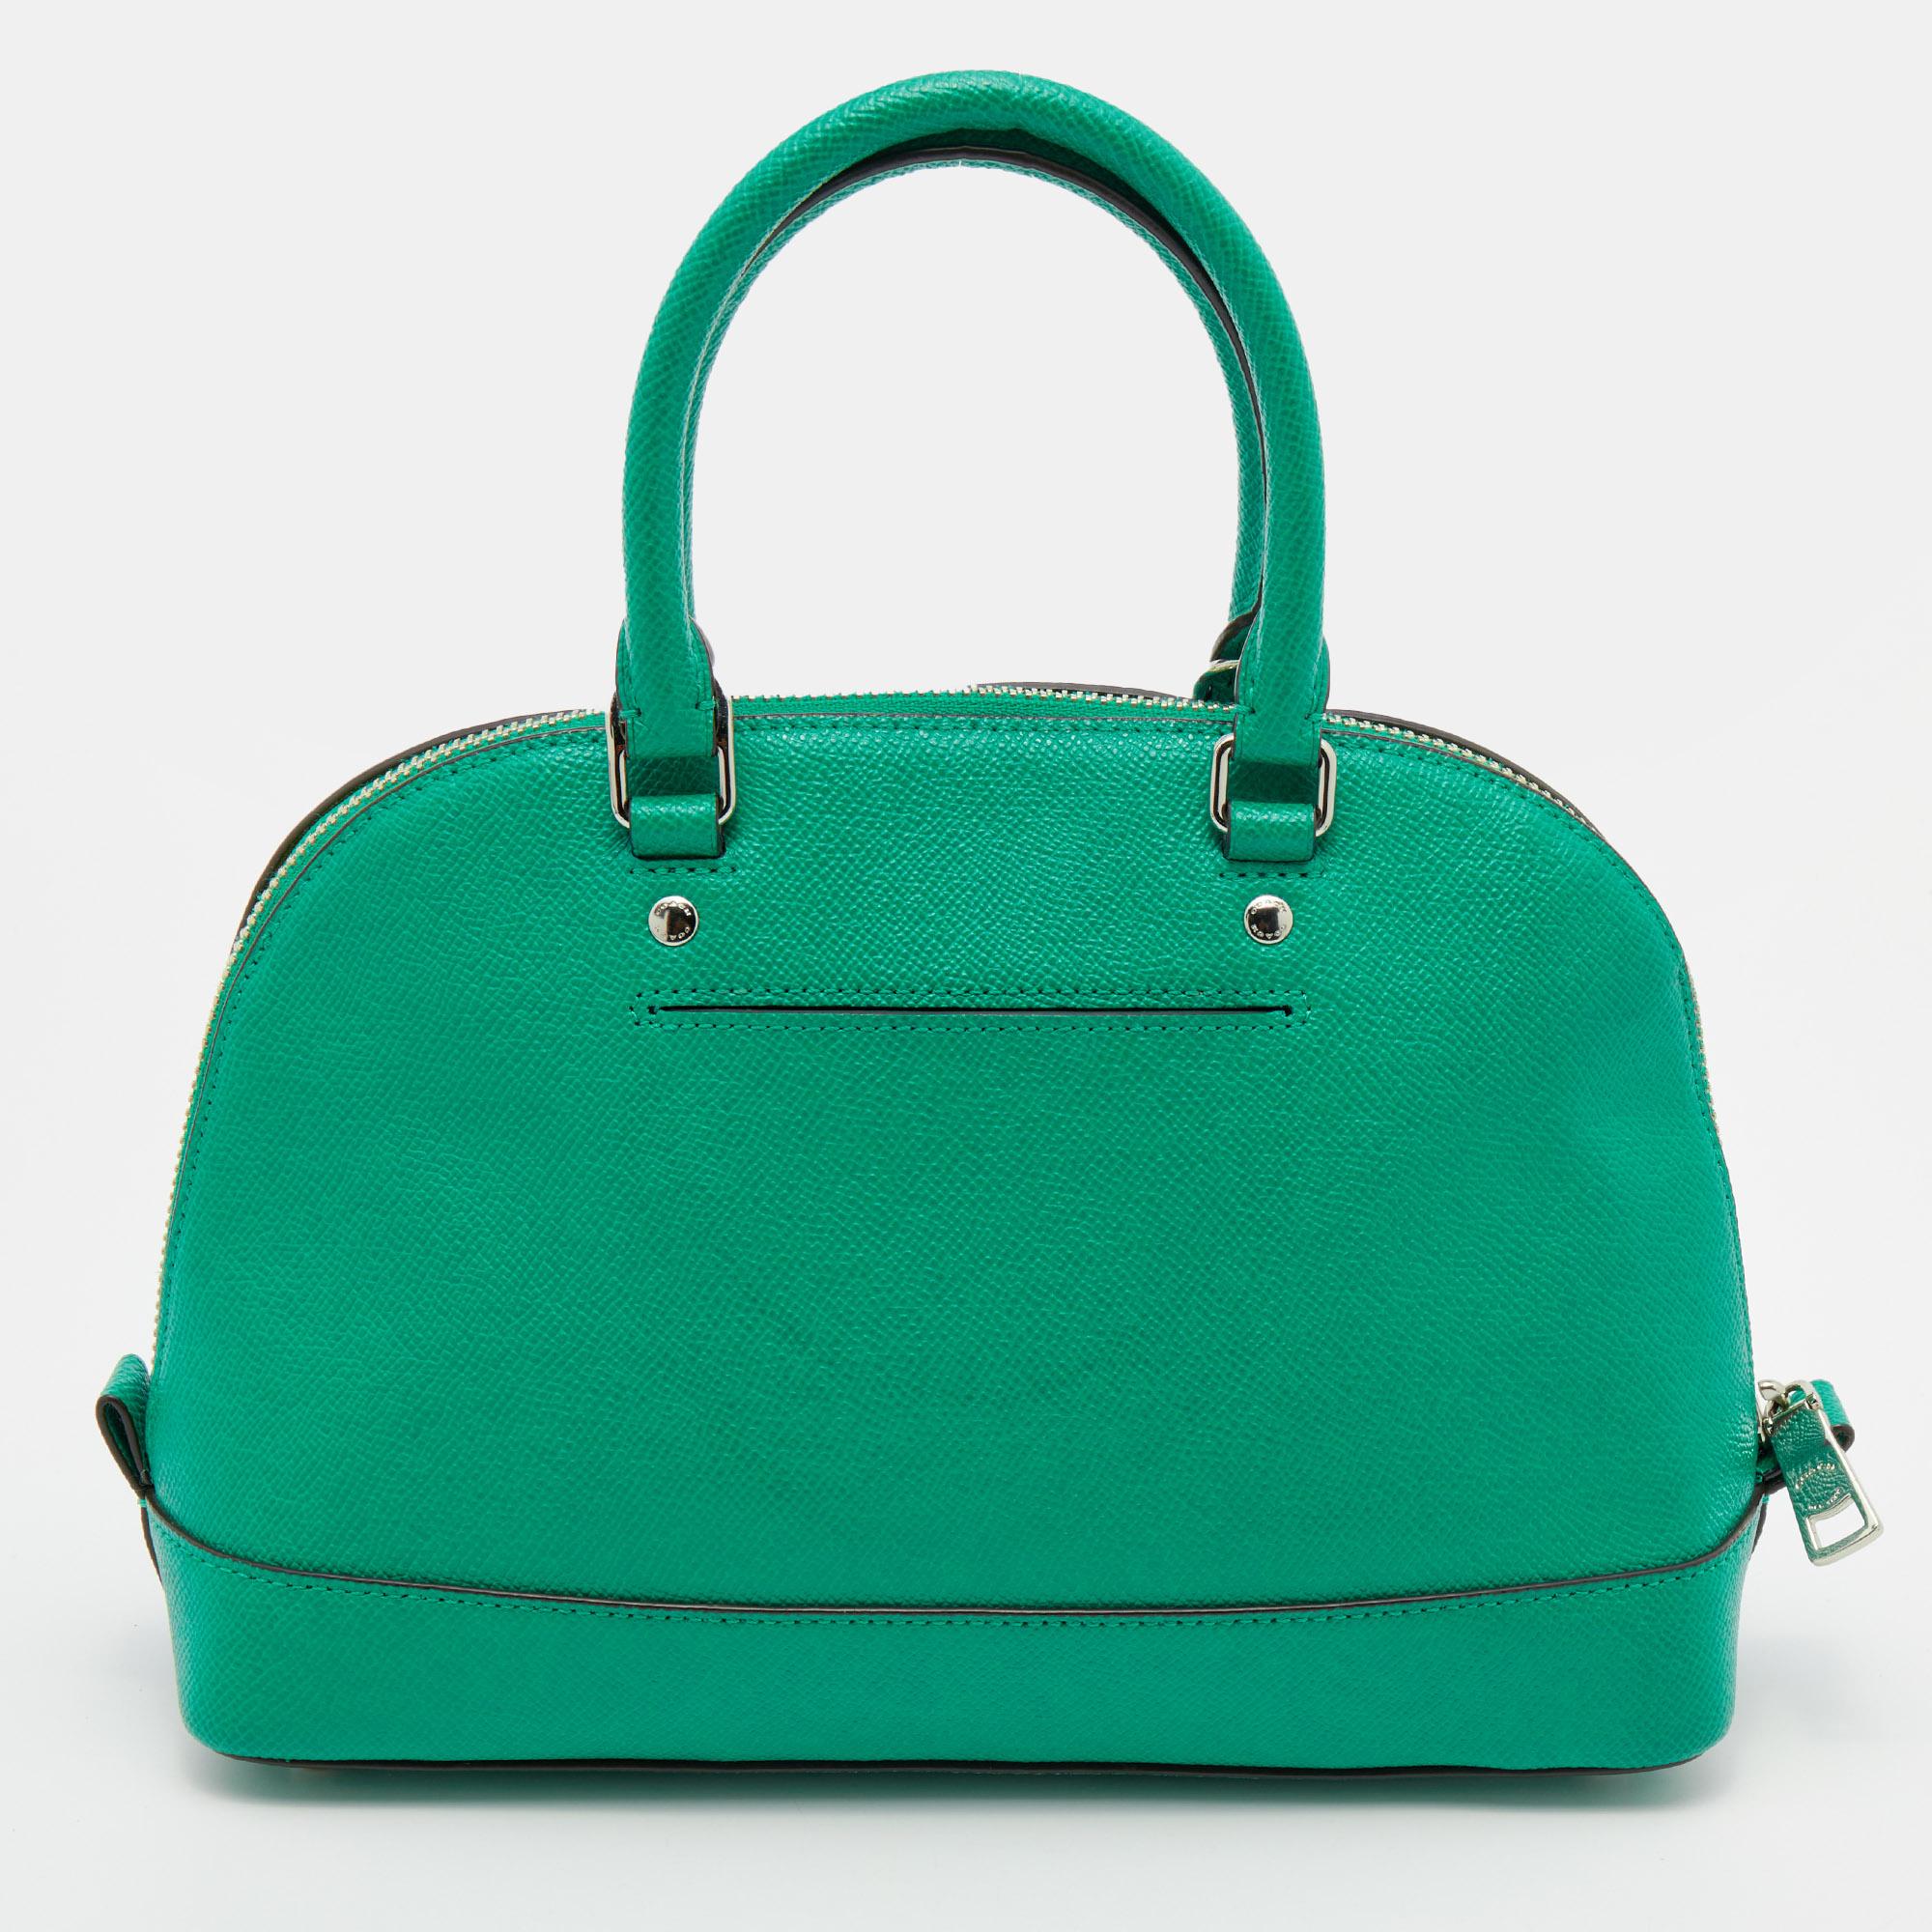 With a bag as vibrant and chic as this Sierra satchel from Coach, you are sure to make a lasting impression! The green bag is crafted from leather and features dual top handles, a detachable shoulder strap, protective metal feet, and a top zip